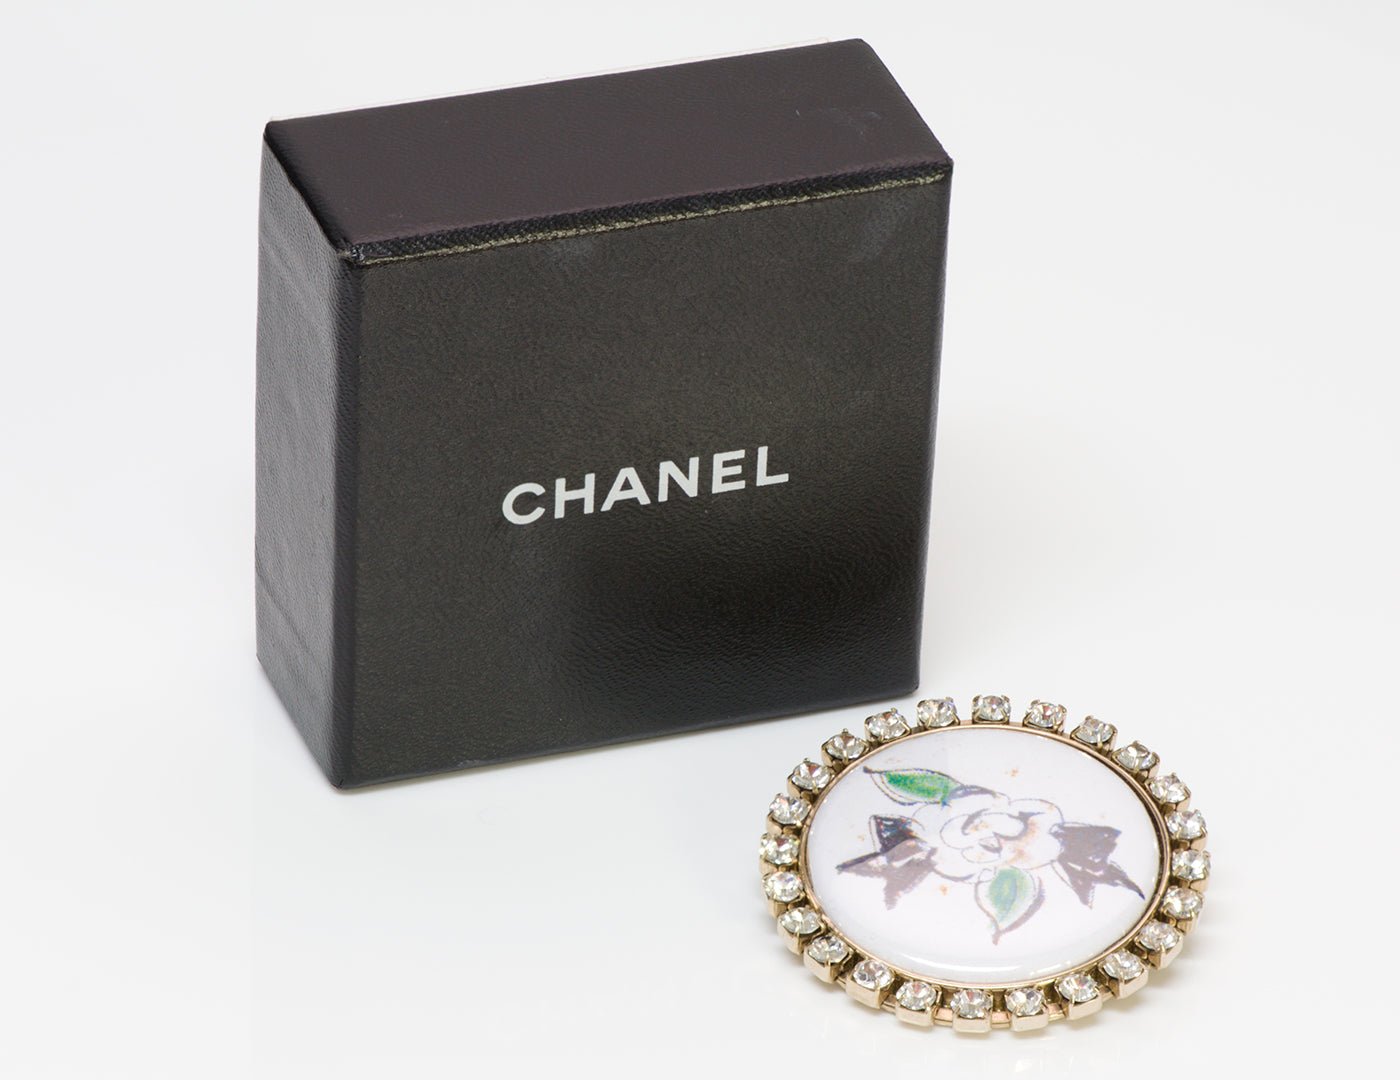 Chanel Paris 2008 CC Camellia Crystal Brooch - DSF Antique Jewelry